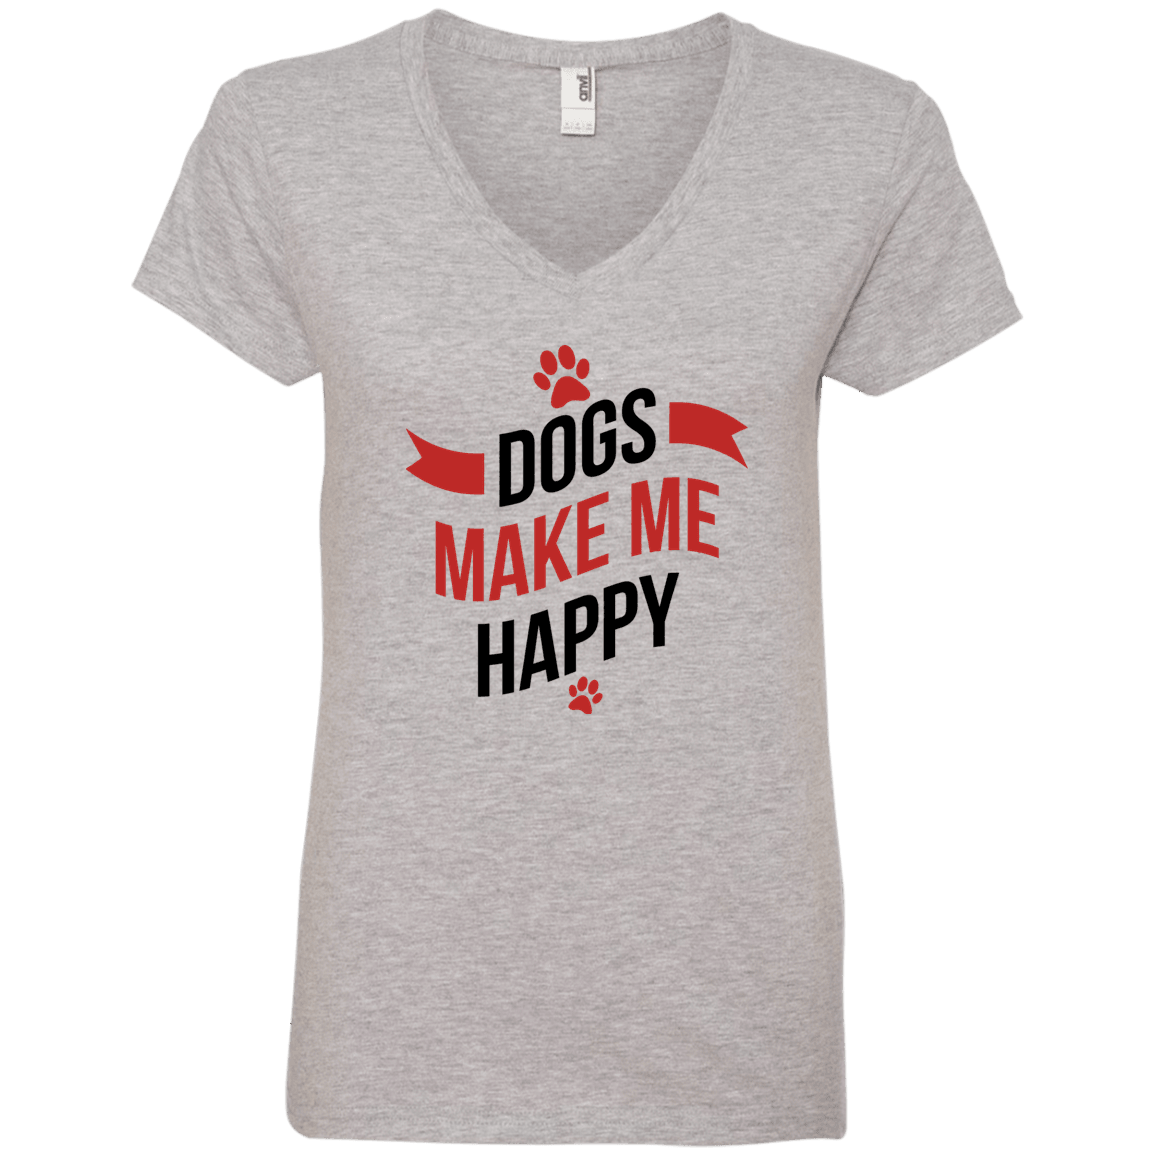 Designs by MyUtopia Shout Out:Dogs Make Me Happy Mens/Ladies V-Neck T-Shirt,Ladies' V-Neck T-Shirt / S / Heather Grey,Adult Unisex T-Shirt